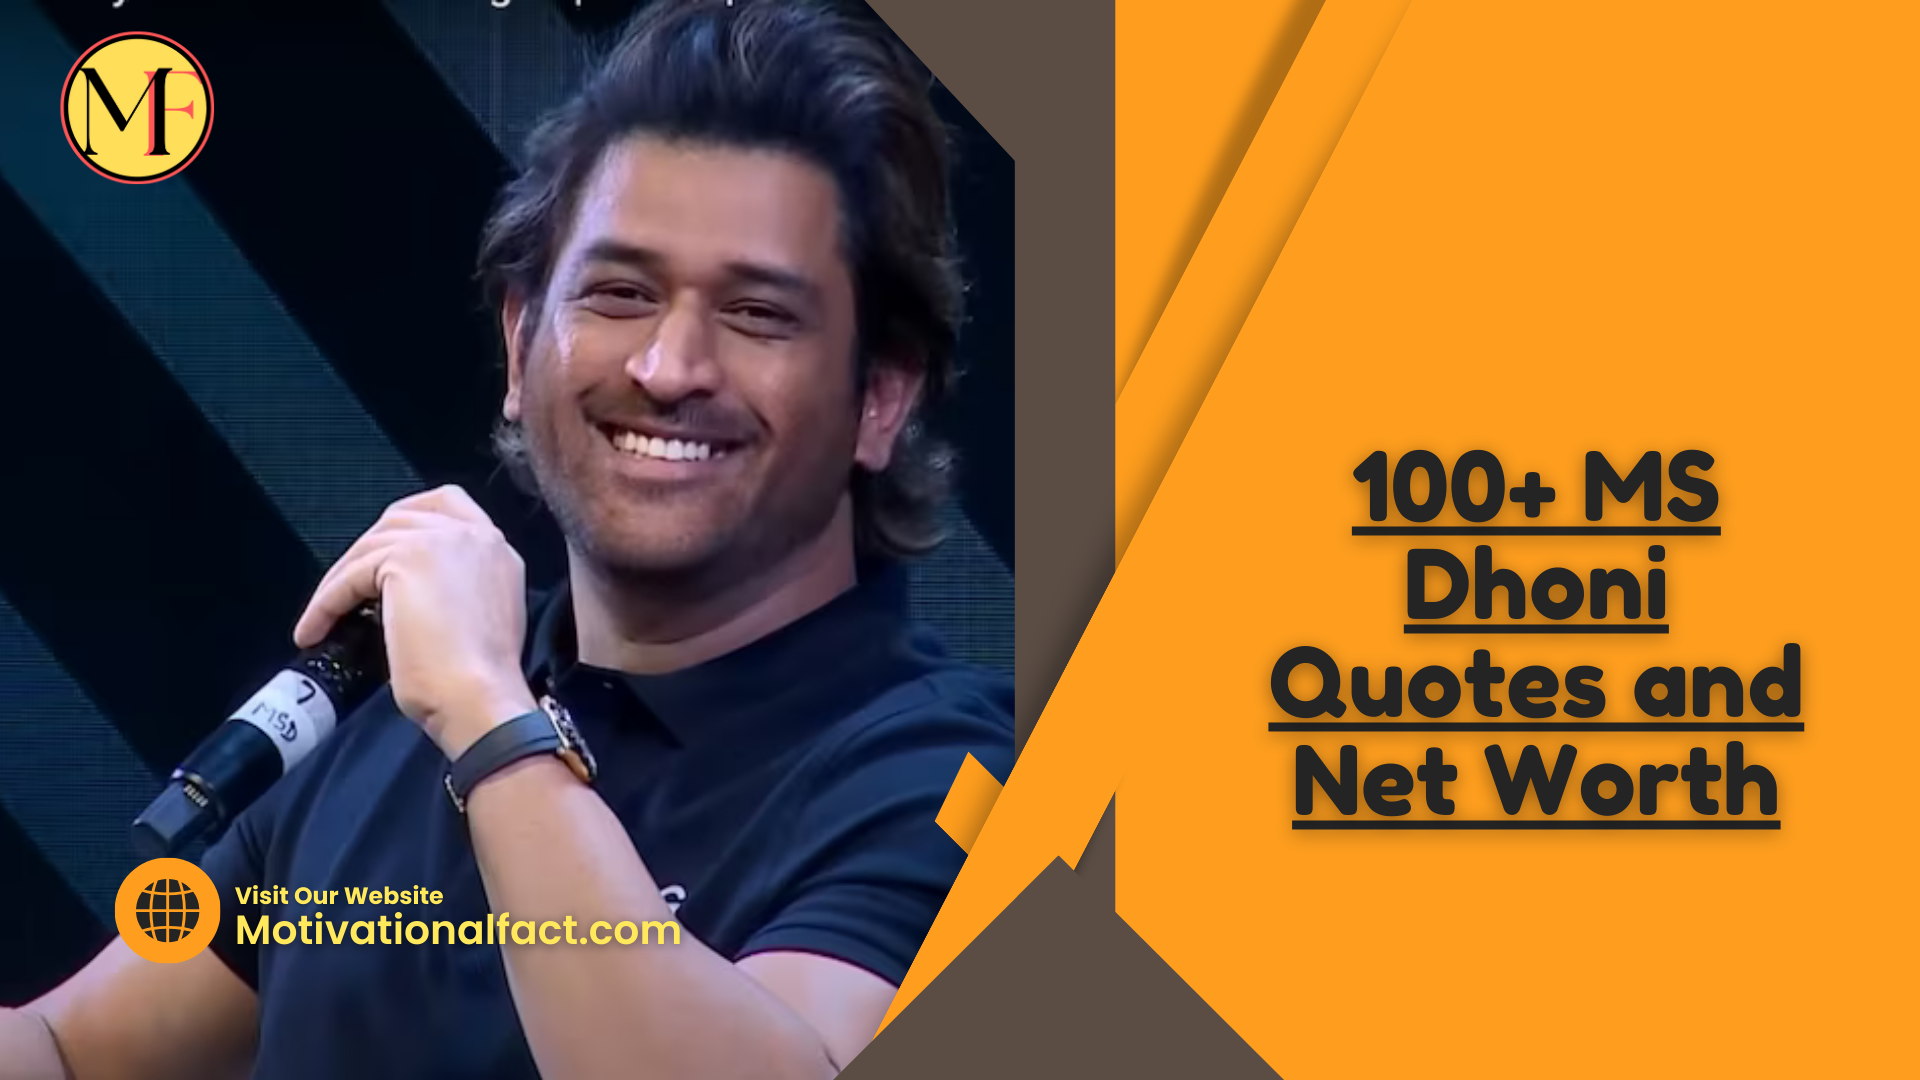 100+ MS Dhoni Quotes and Net Worth